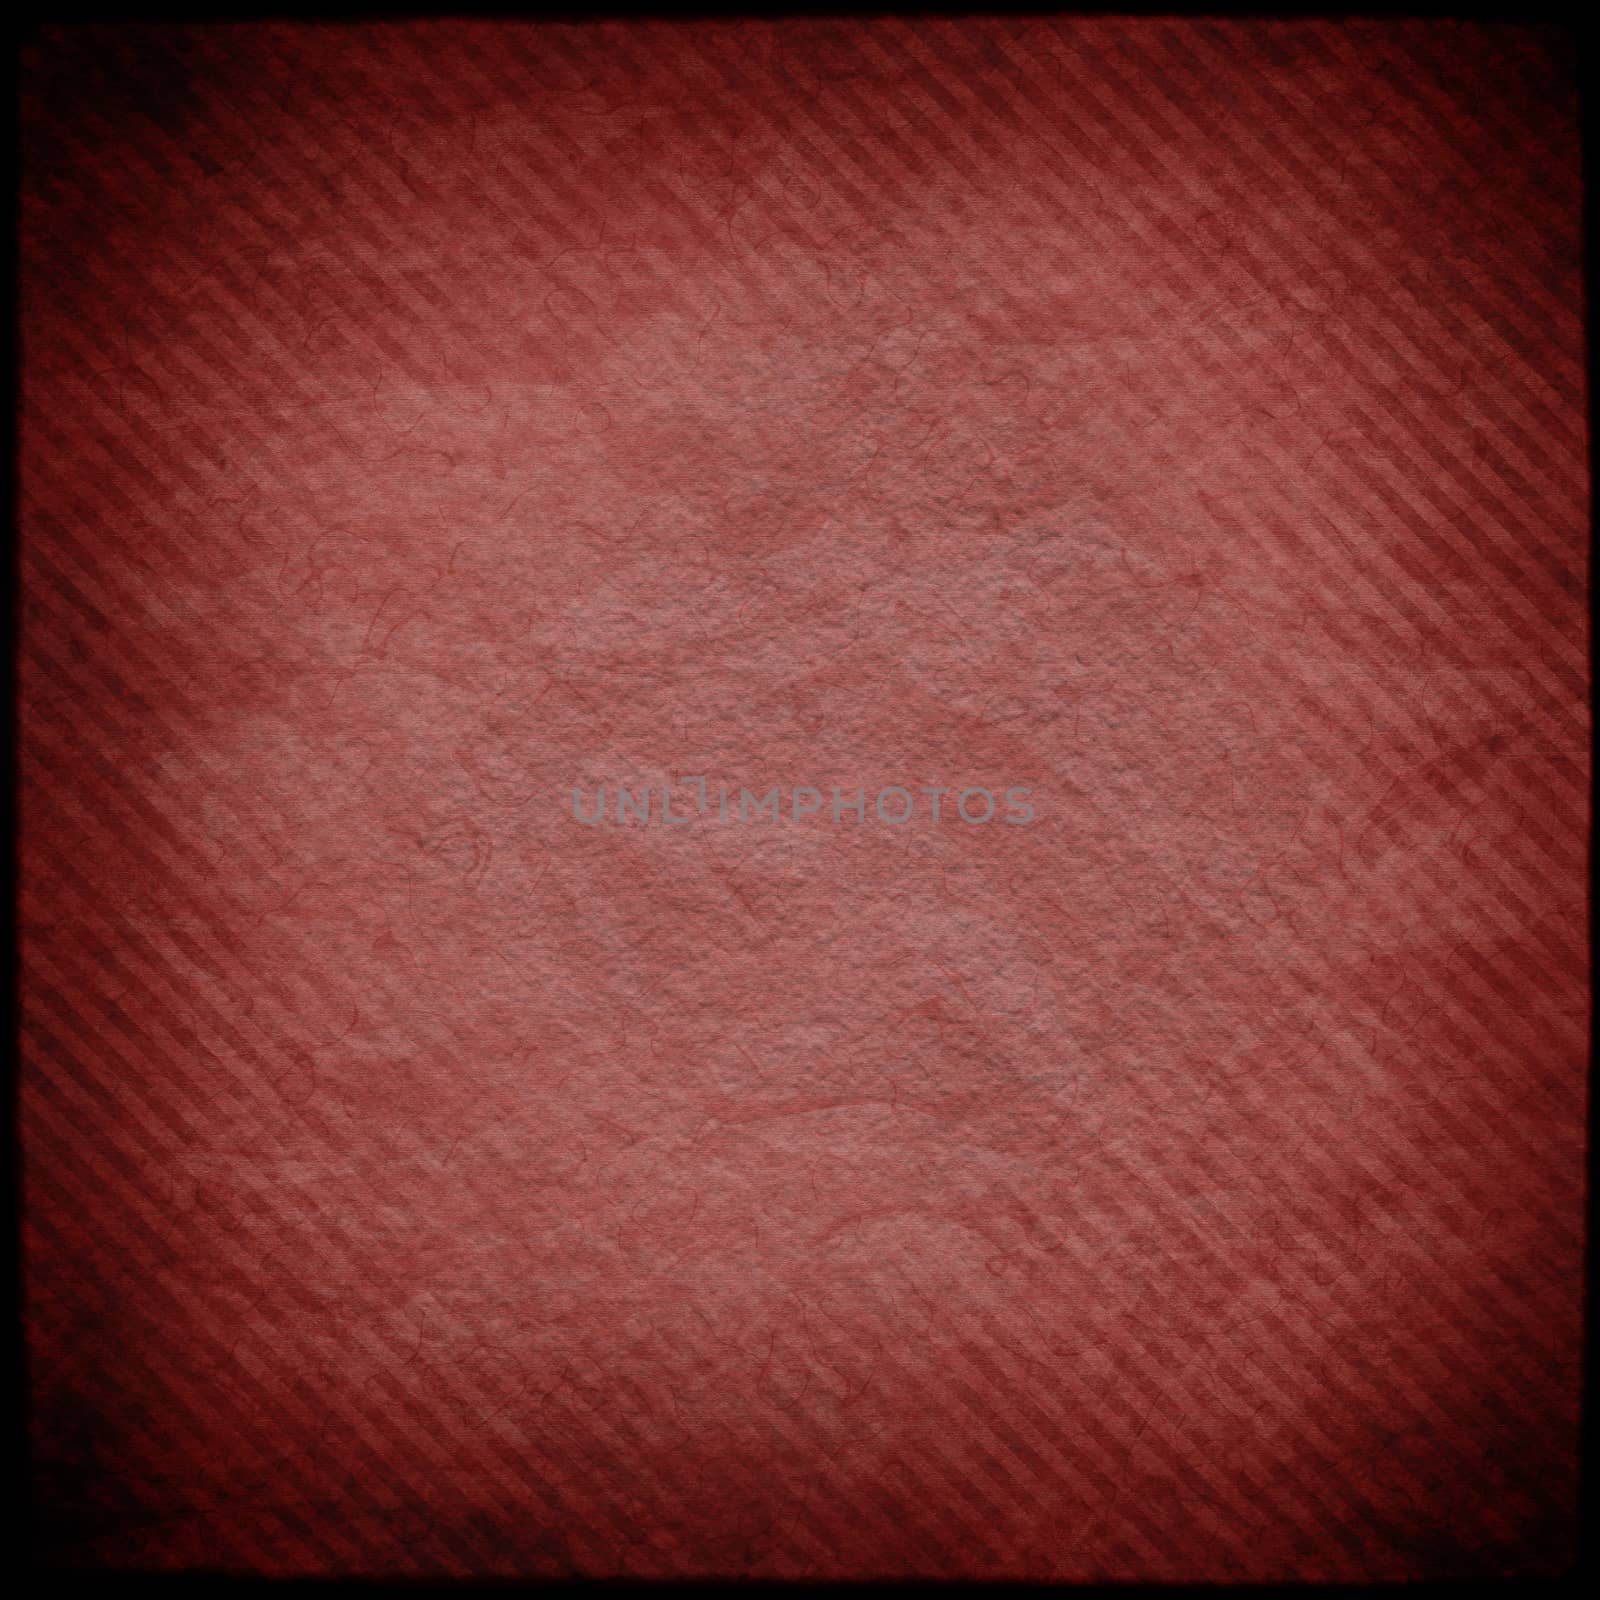 Red grunge striped background or texture by Attila